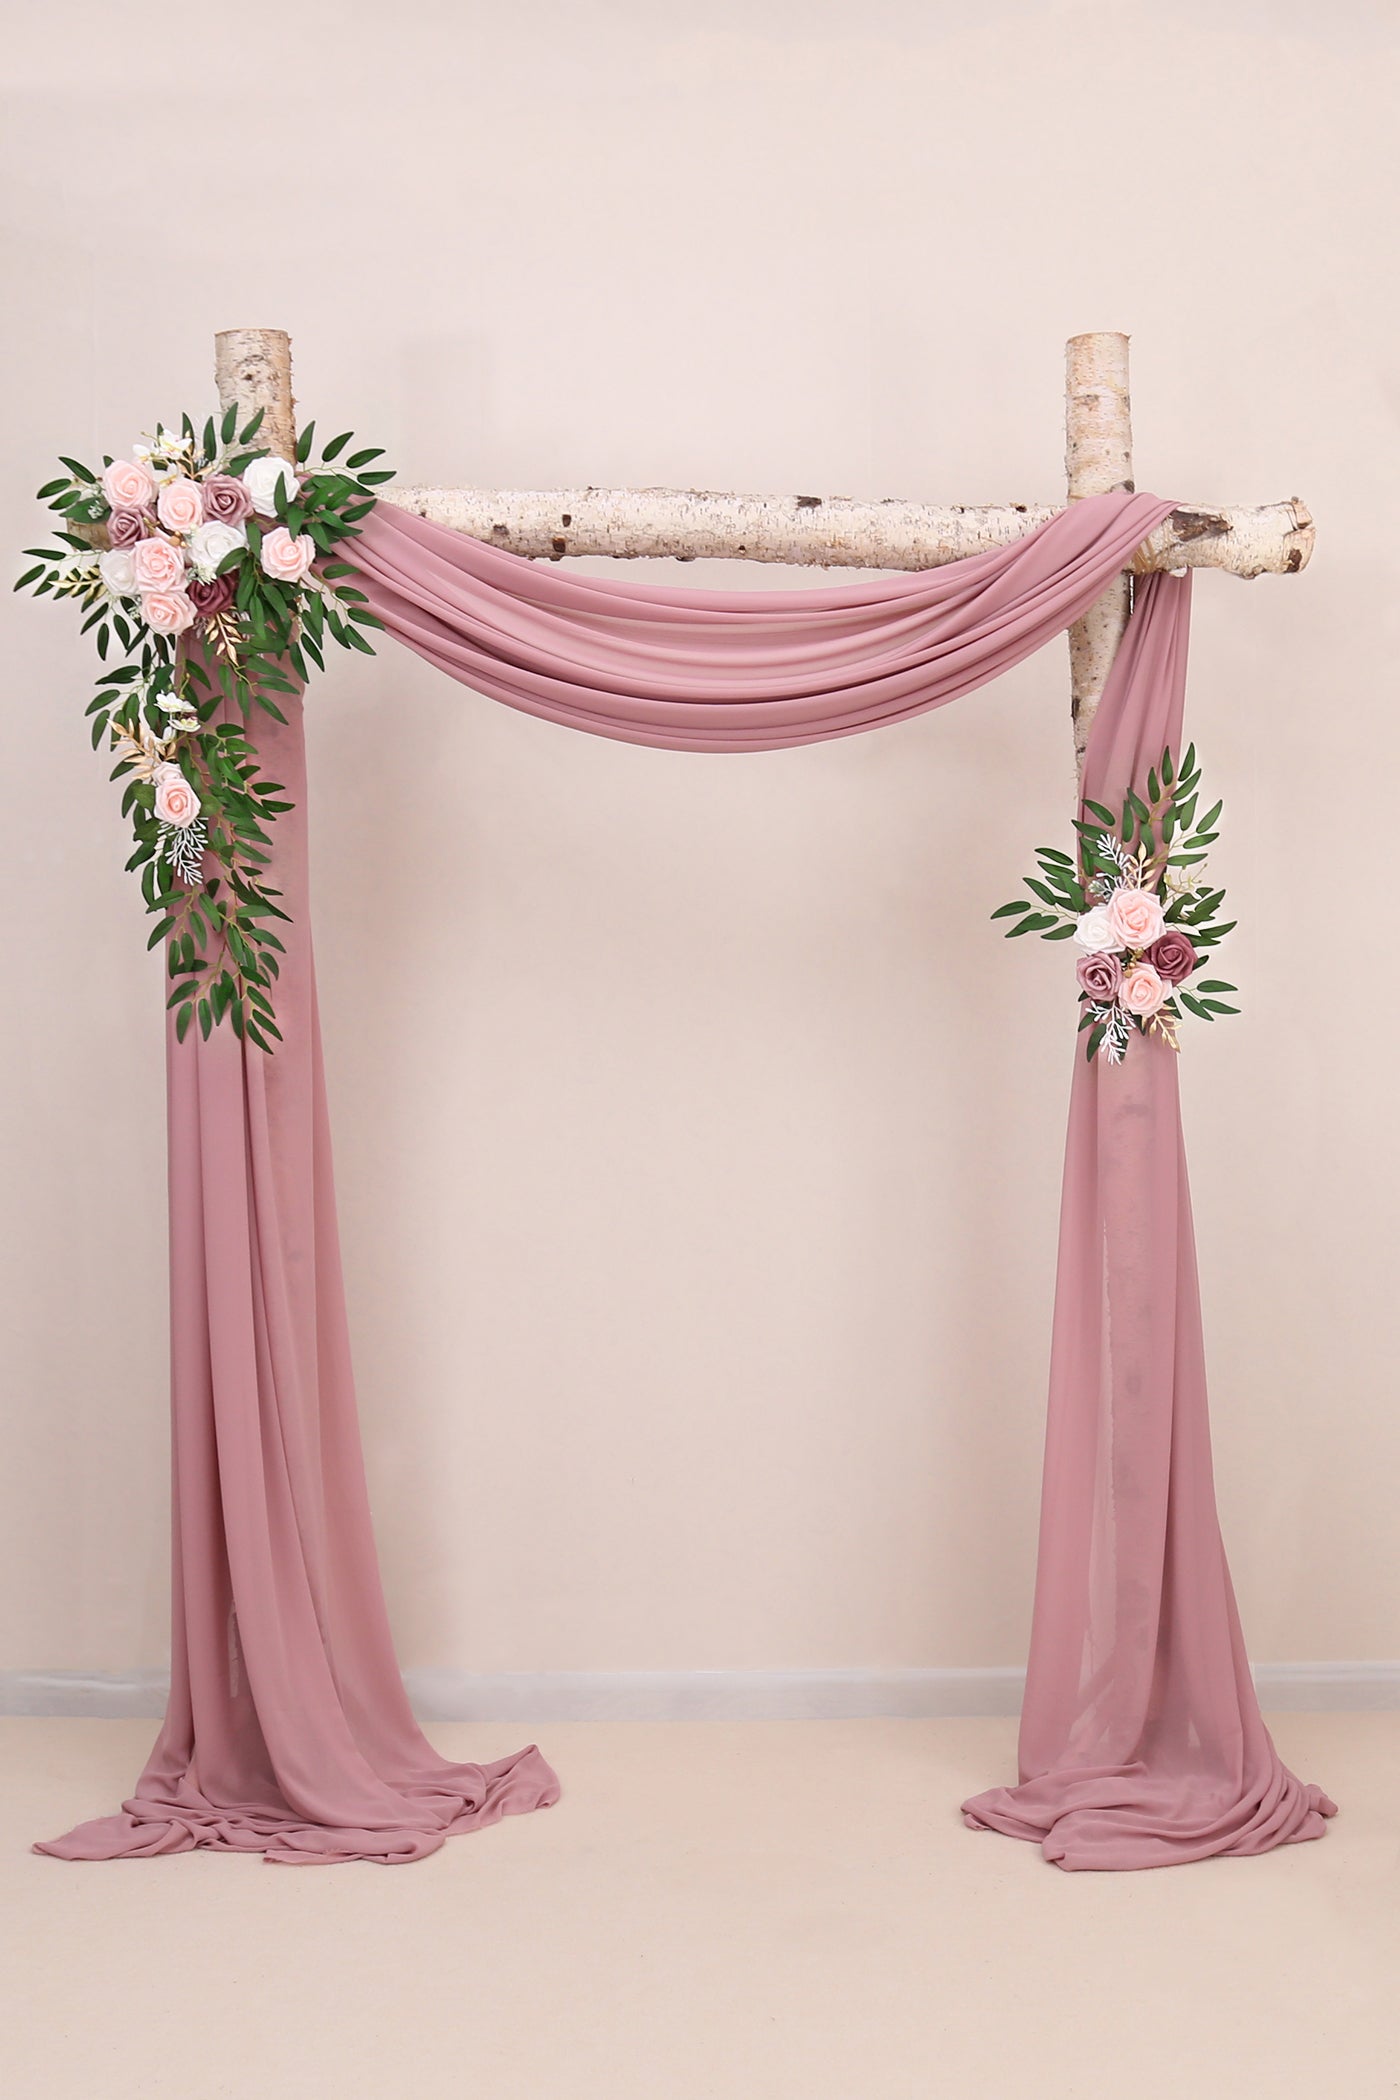 DORIS HOME Artificial Flower Swag Pink and Mauve for Wedding Ceremony Sign Floral Decoration - Pack of 2